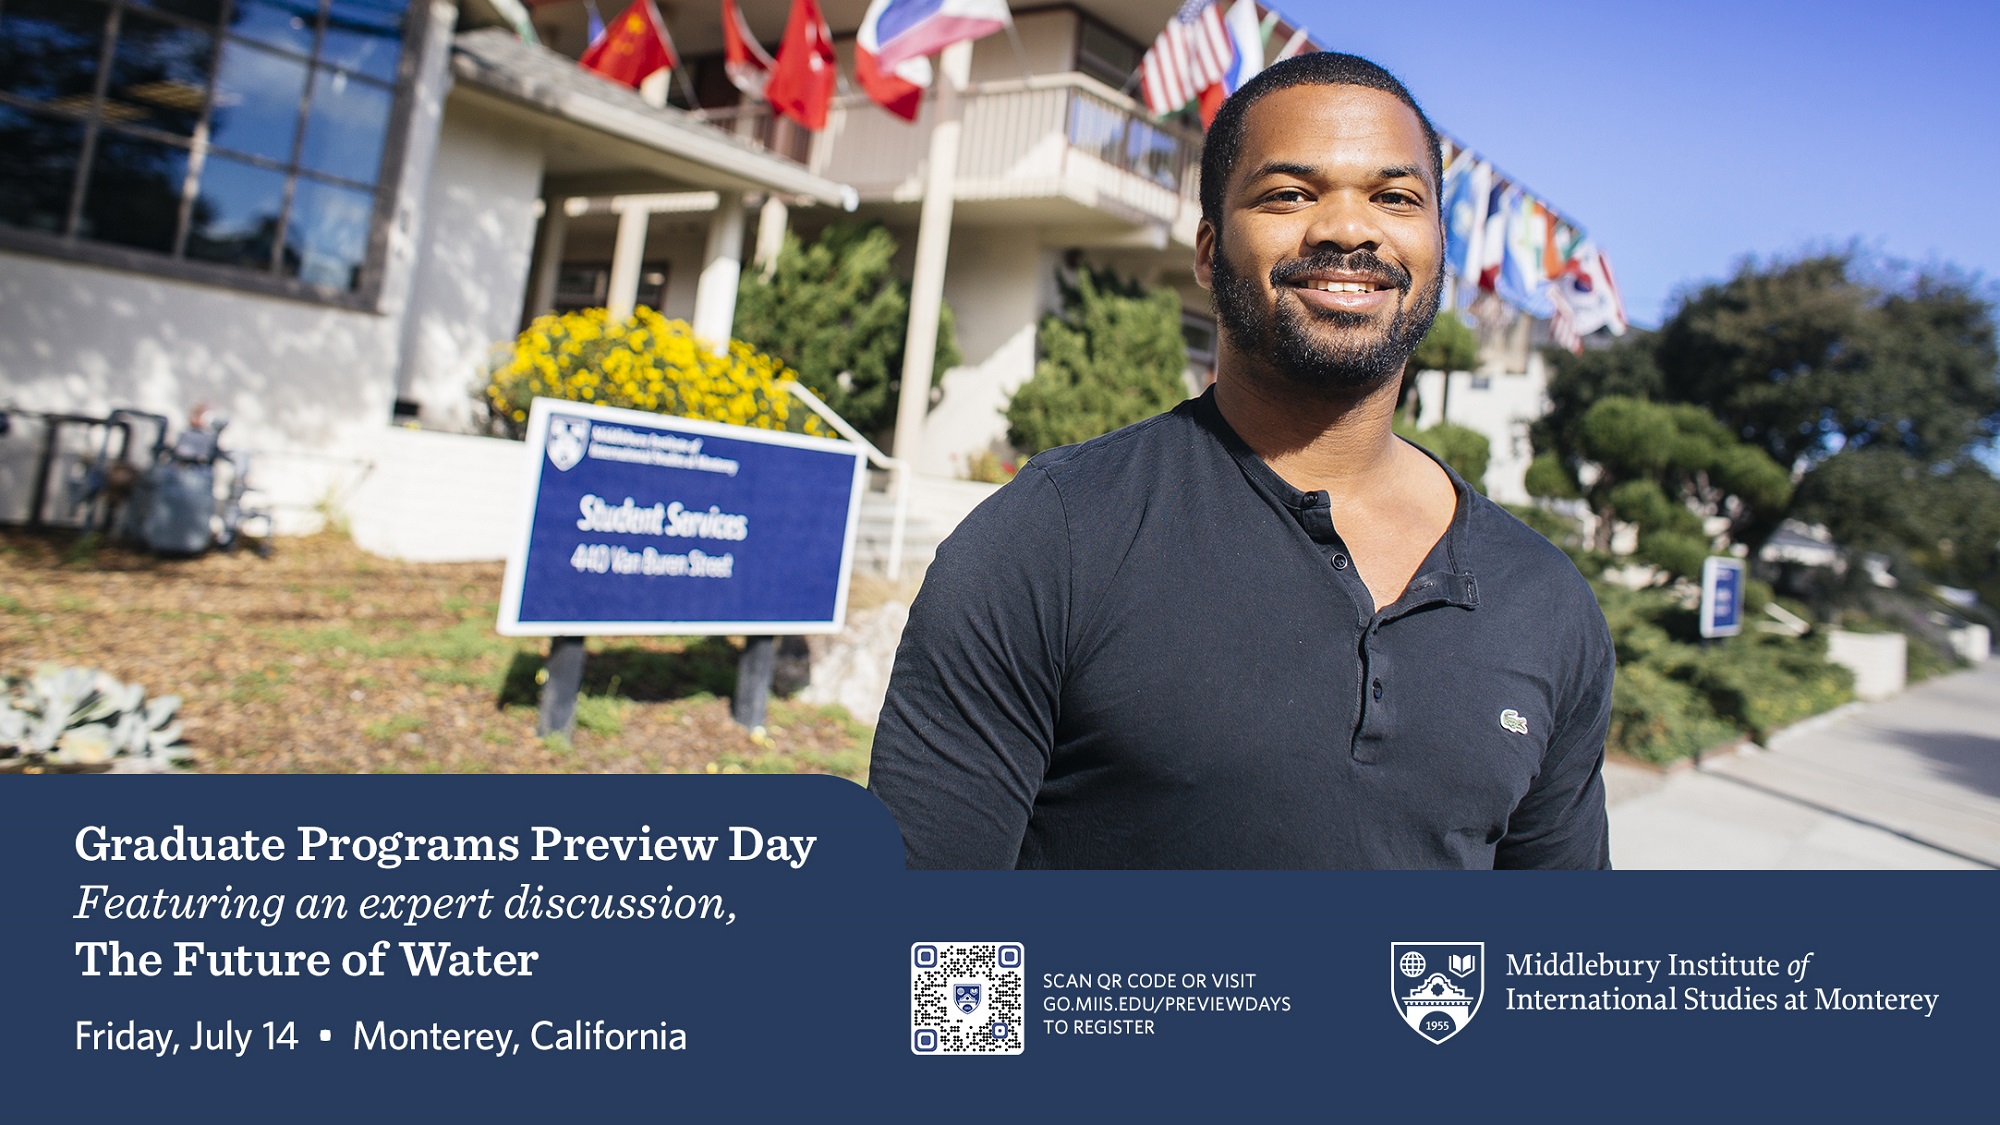 Summer 2023 Preview Day Posterhttps://www.middlebury.edu/institute/admissions/visit/preview-dayshttps://www.middlebury.edu/institute/admissions/visit/preview-dayshttps://www.middlebury.edu/institute/admissions/visit/preview-dayshttps://www.middlebury.edu/institute/admissions/visit/preview-dayshttps://www.middlebury.edu/institute/admissions/visit/preview-days